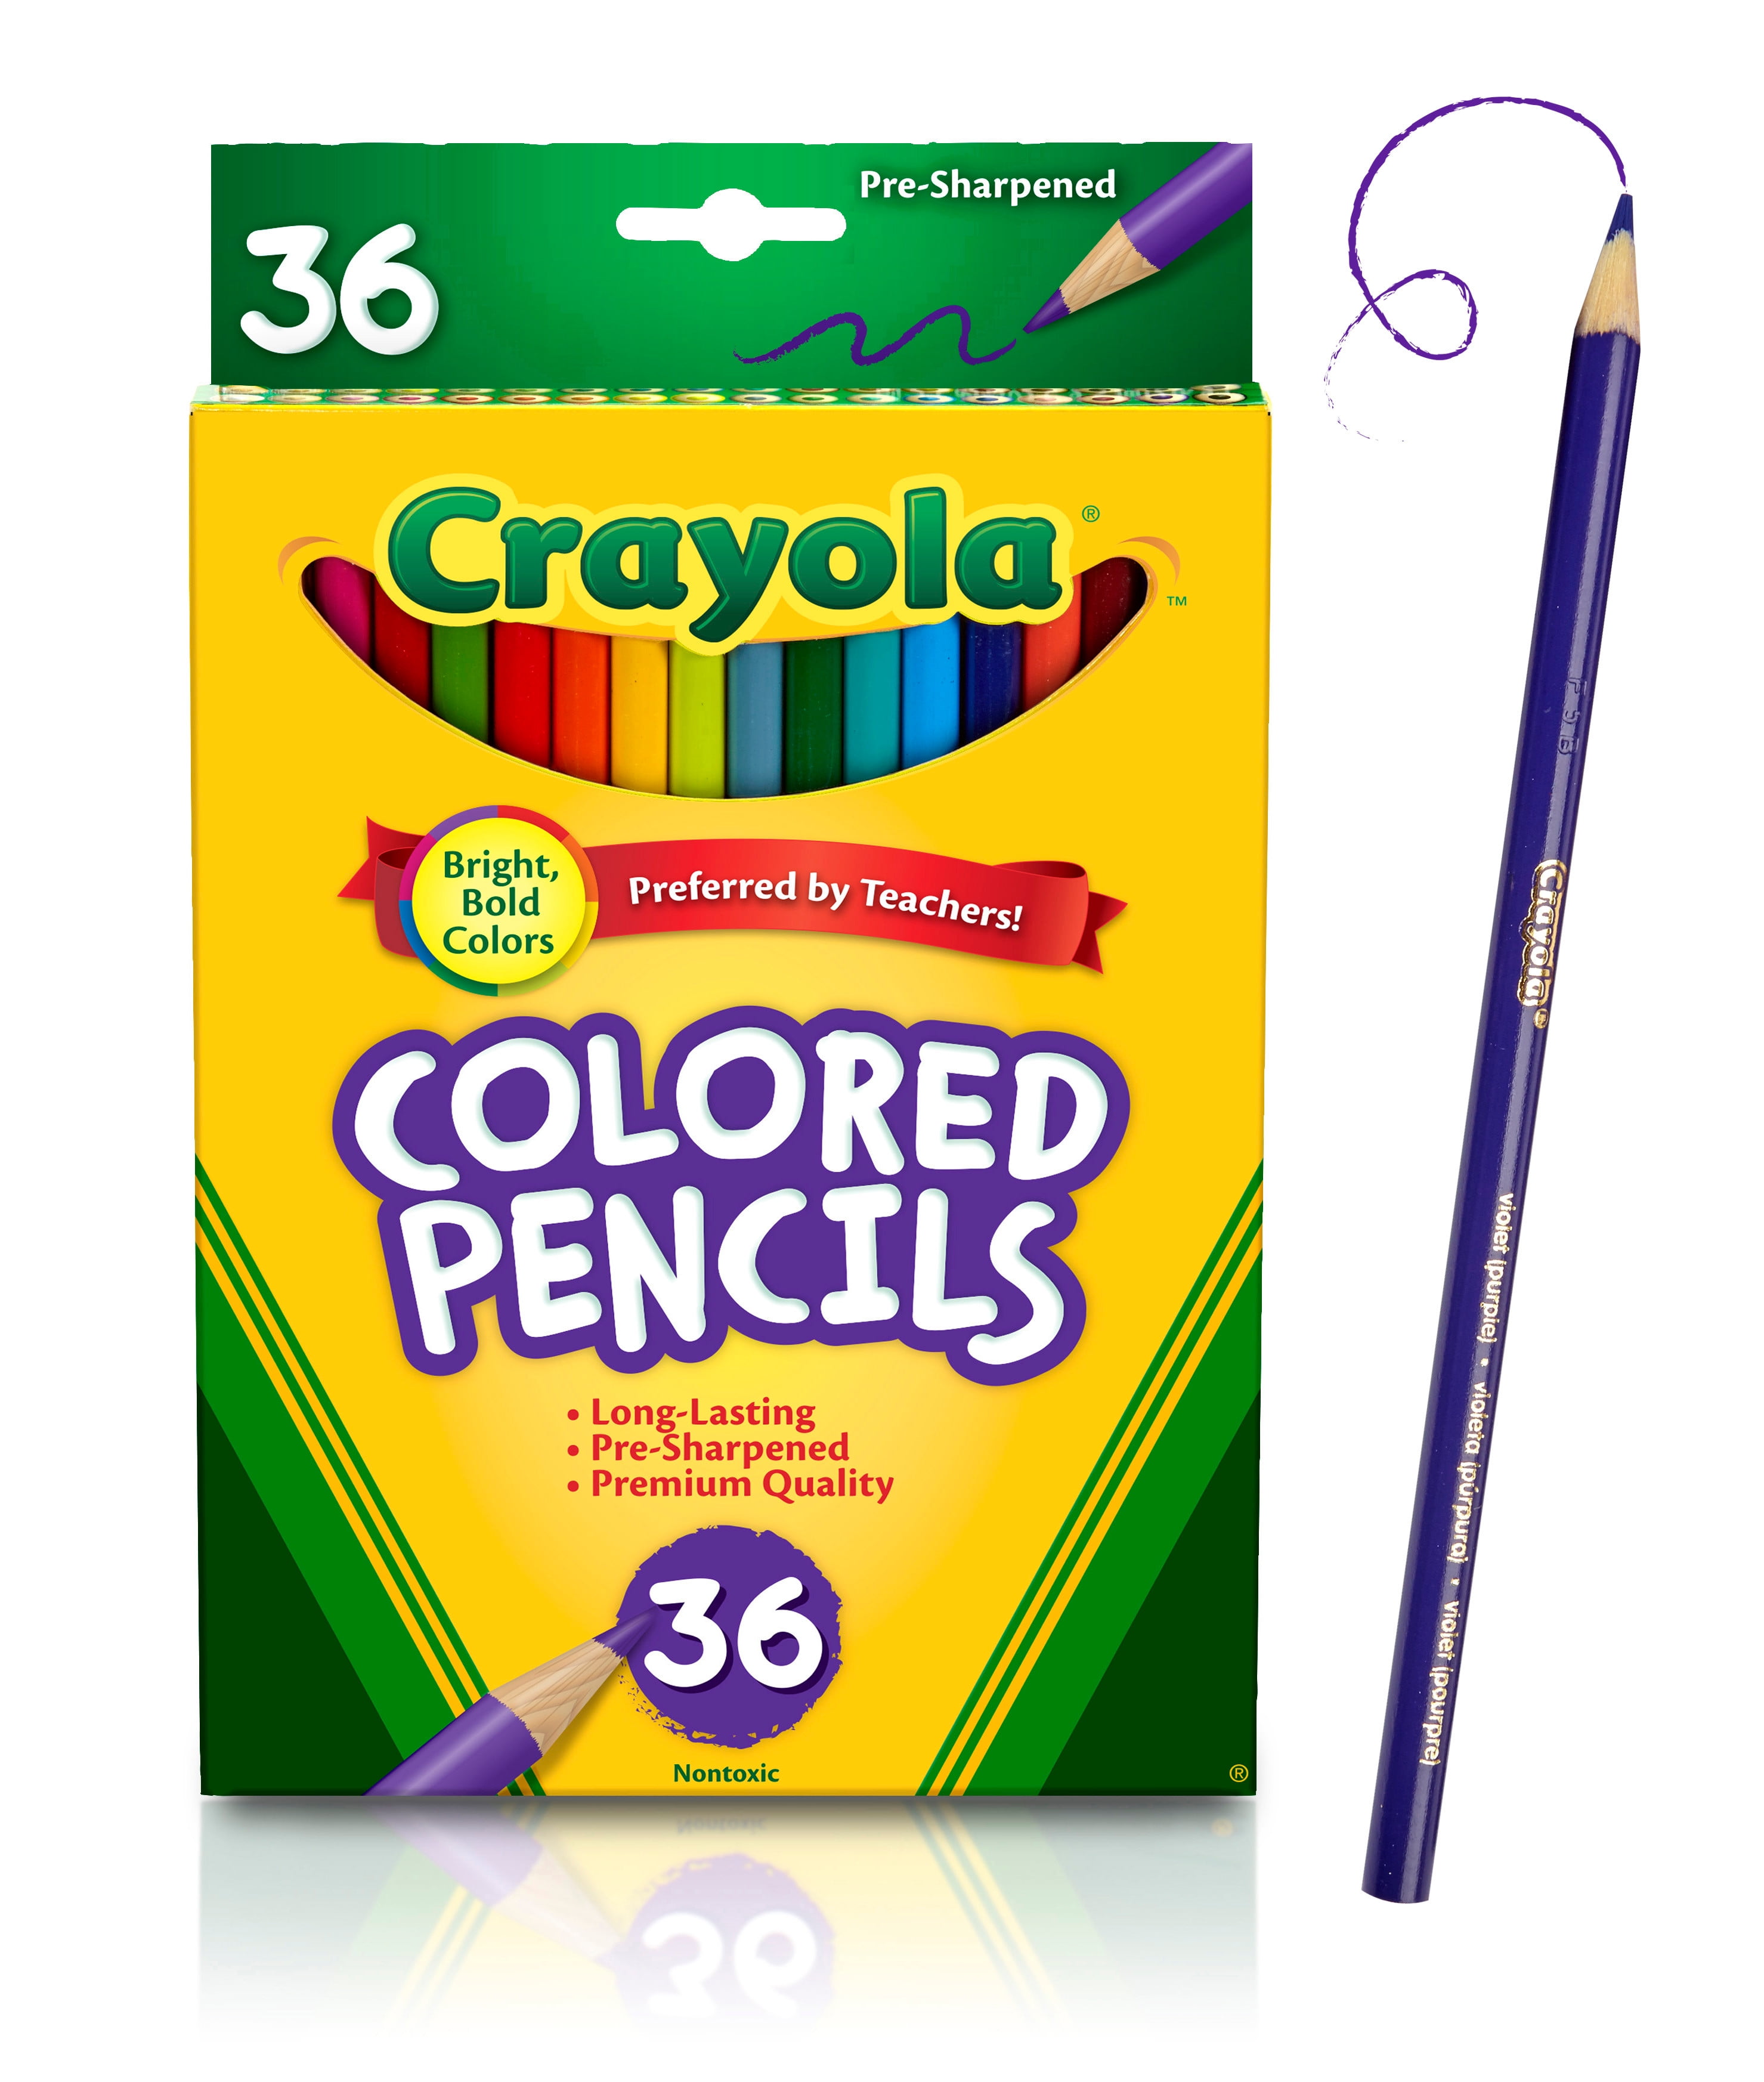 Kids LED Pencils & Color Gift set Writing School Supplies Party Fun Favors Toys 